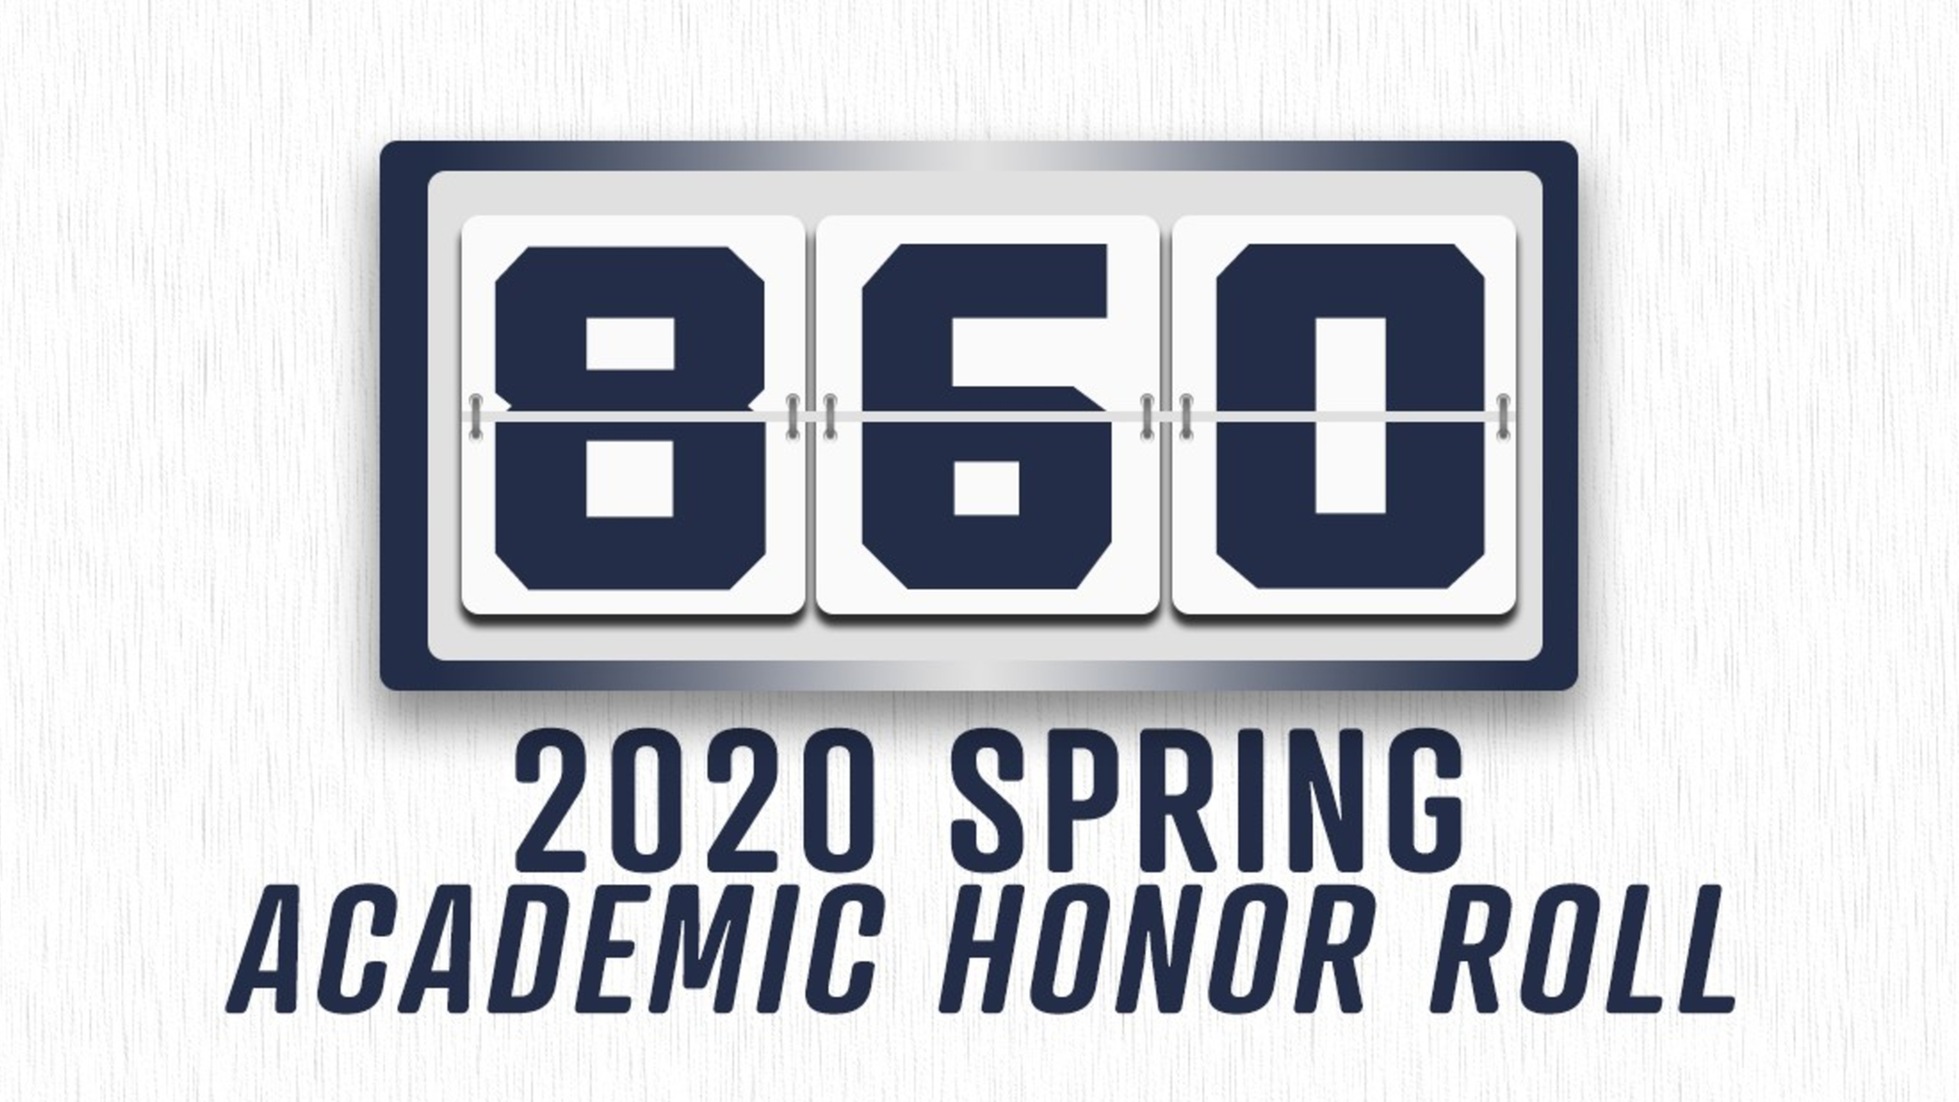 70 Crusaders Named to SCAC Spring Student-Athlete Academic Honor Roll